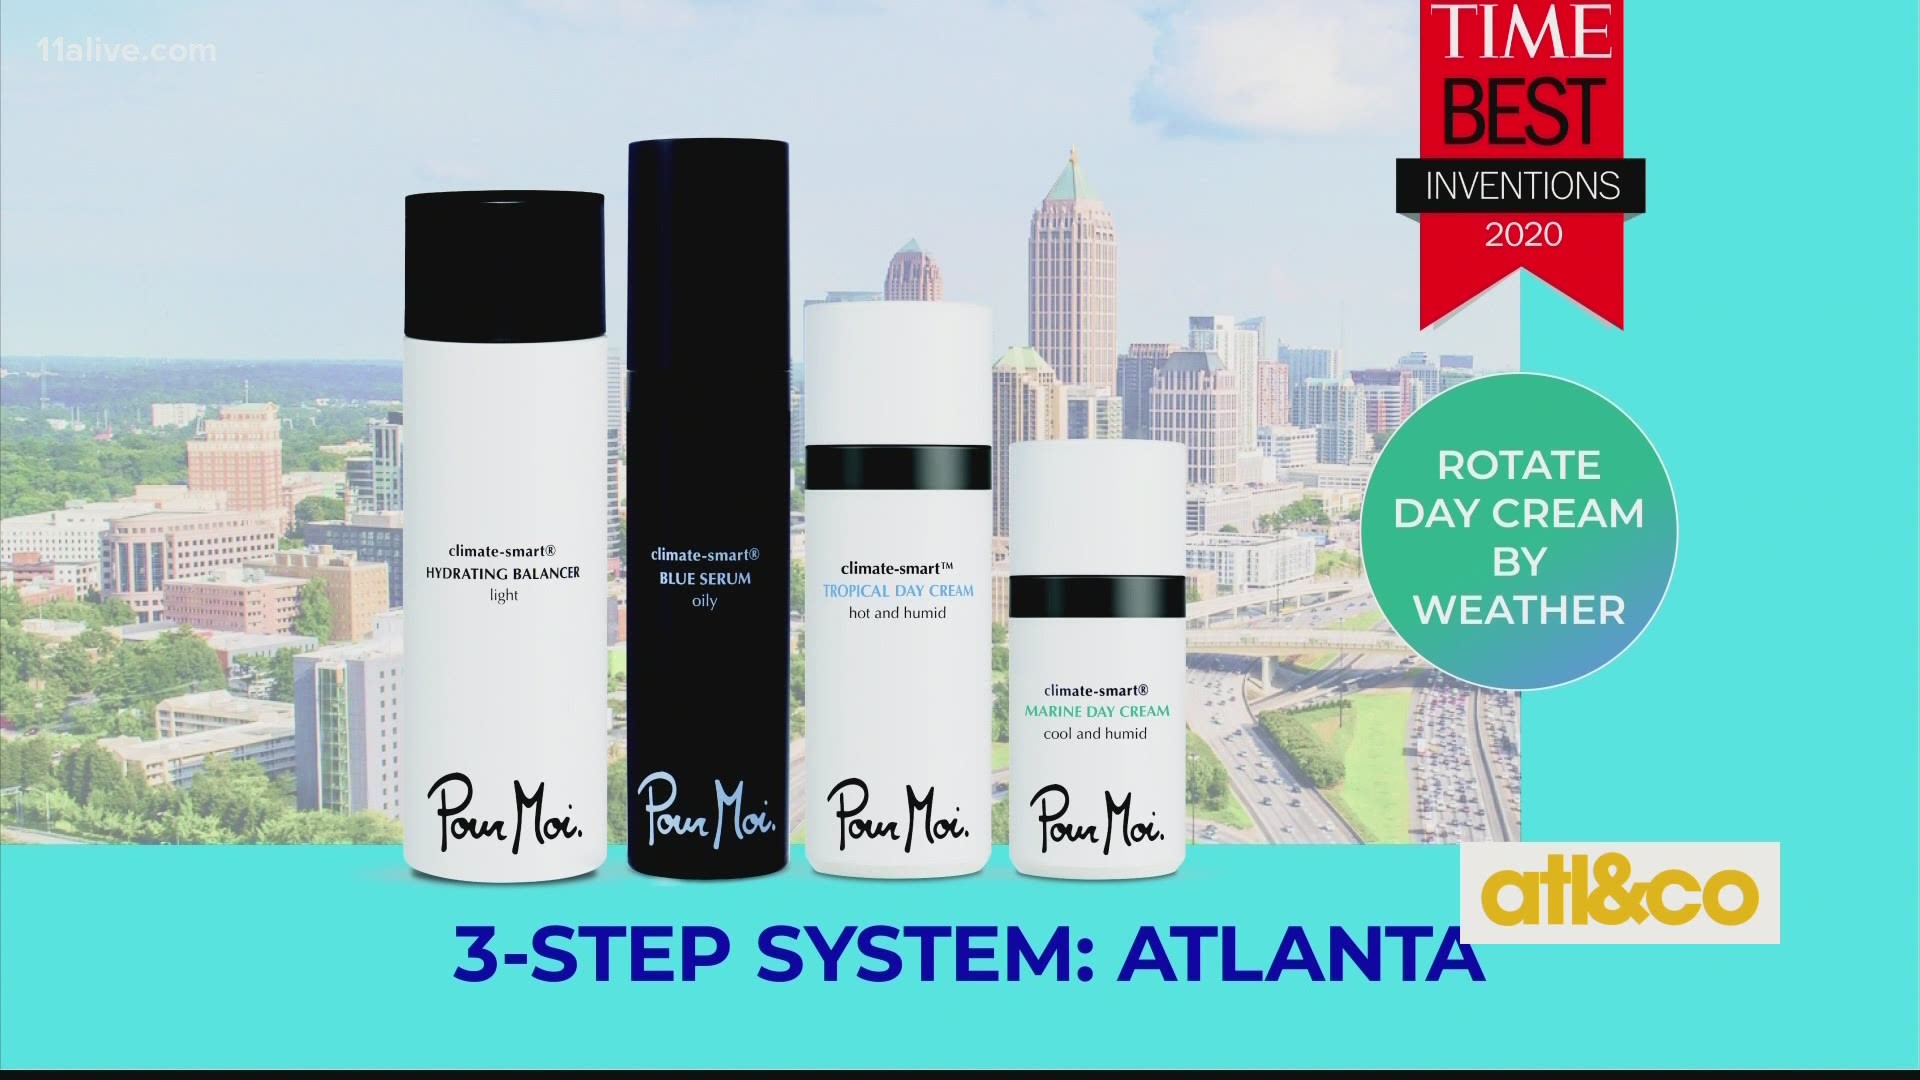 Learn about anti-aging skincare specifically customized for your skin in Atlanta.